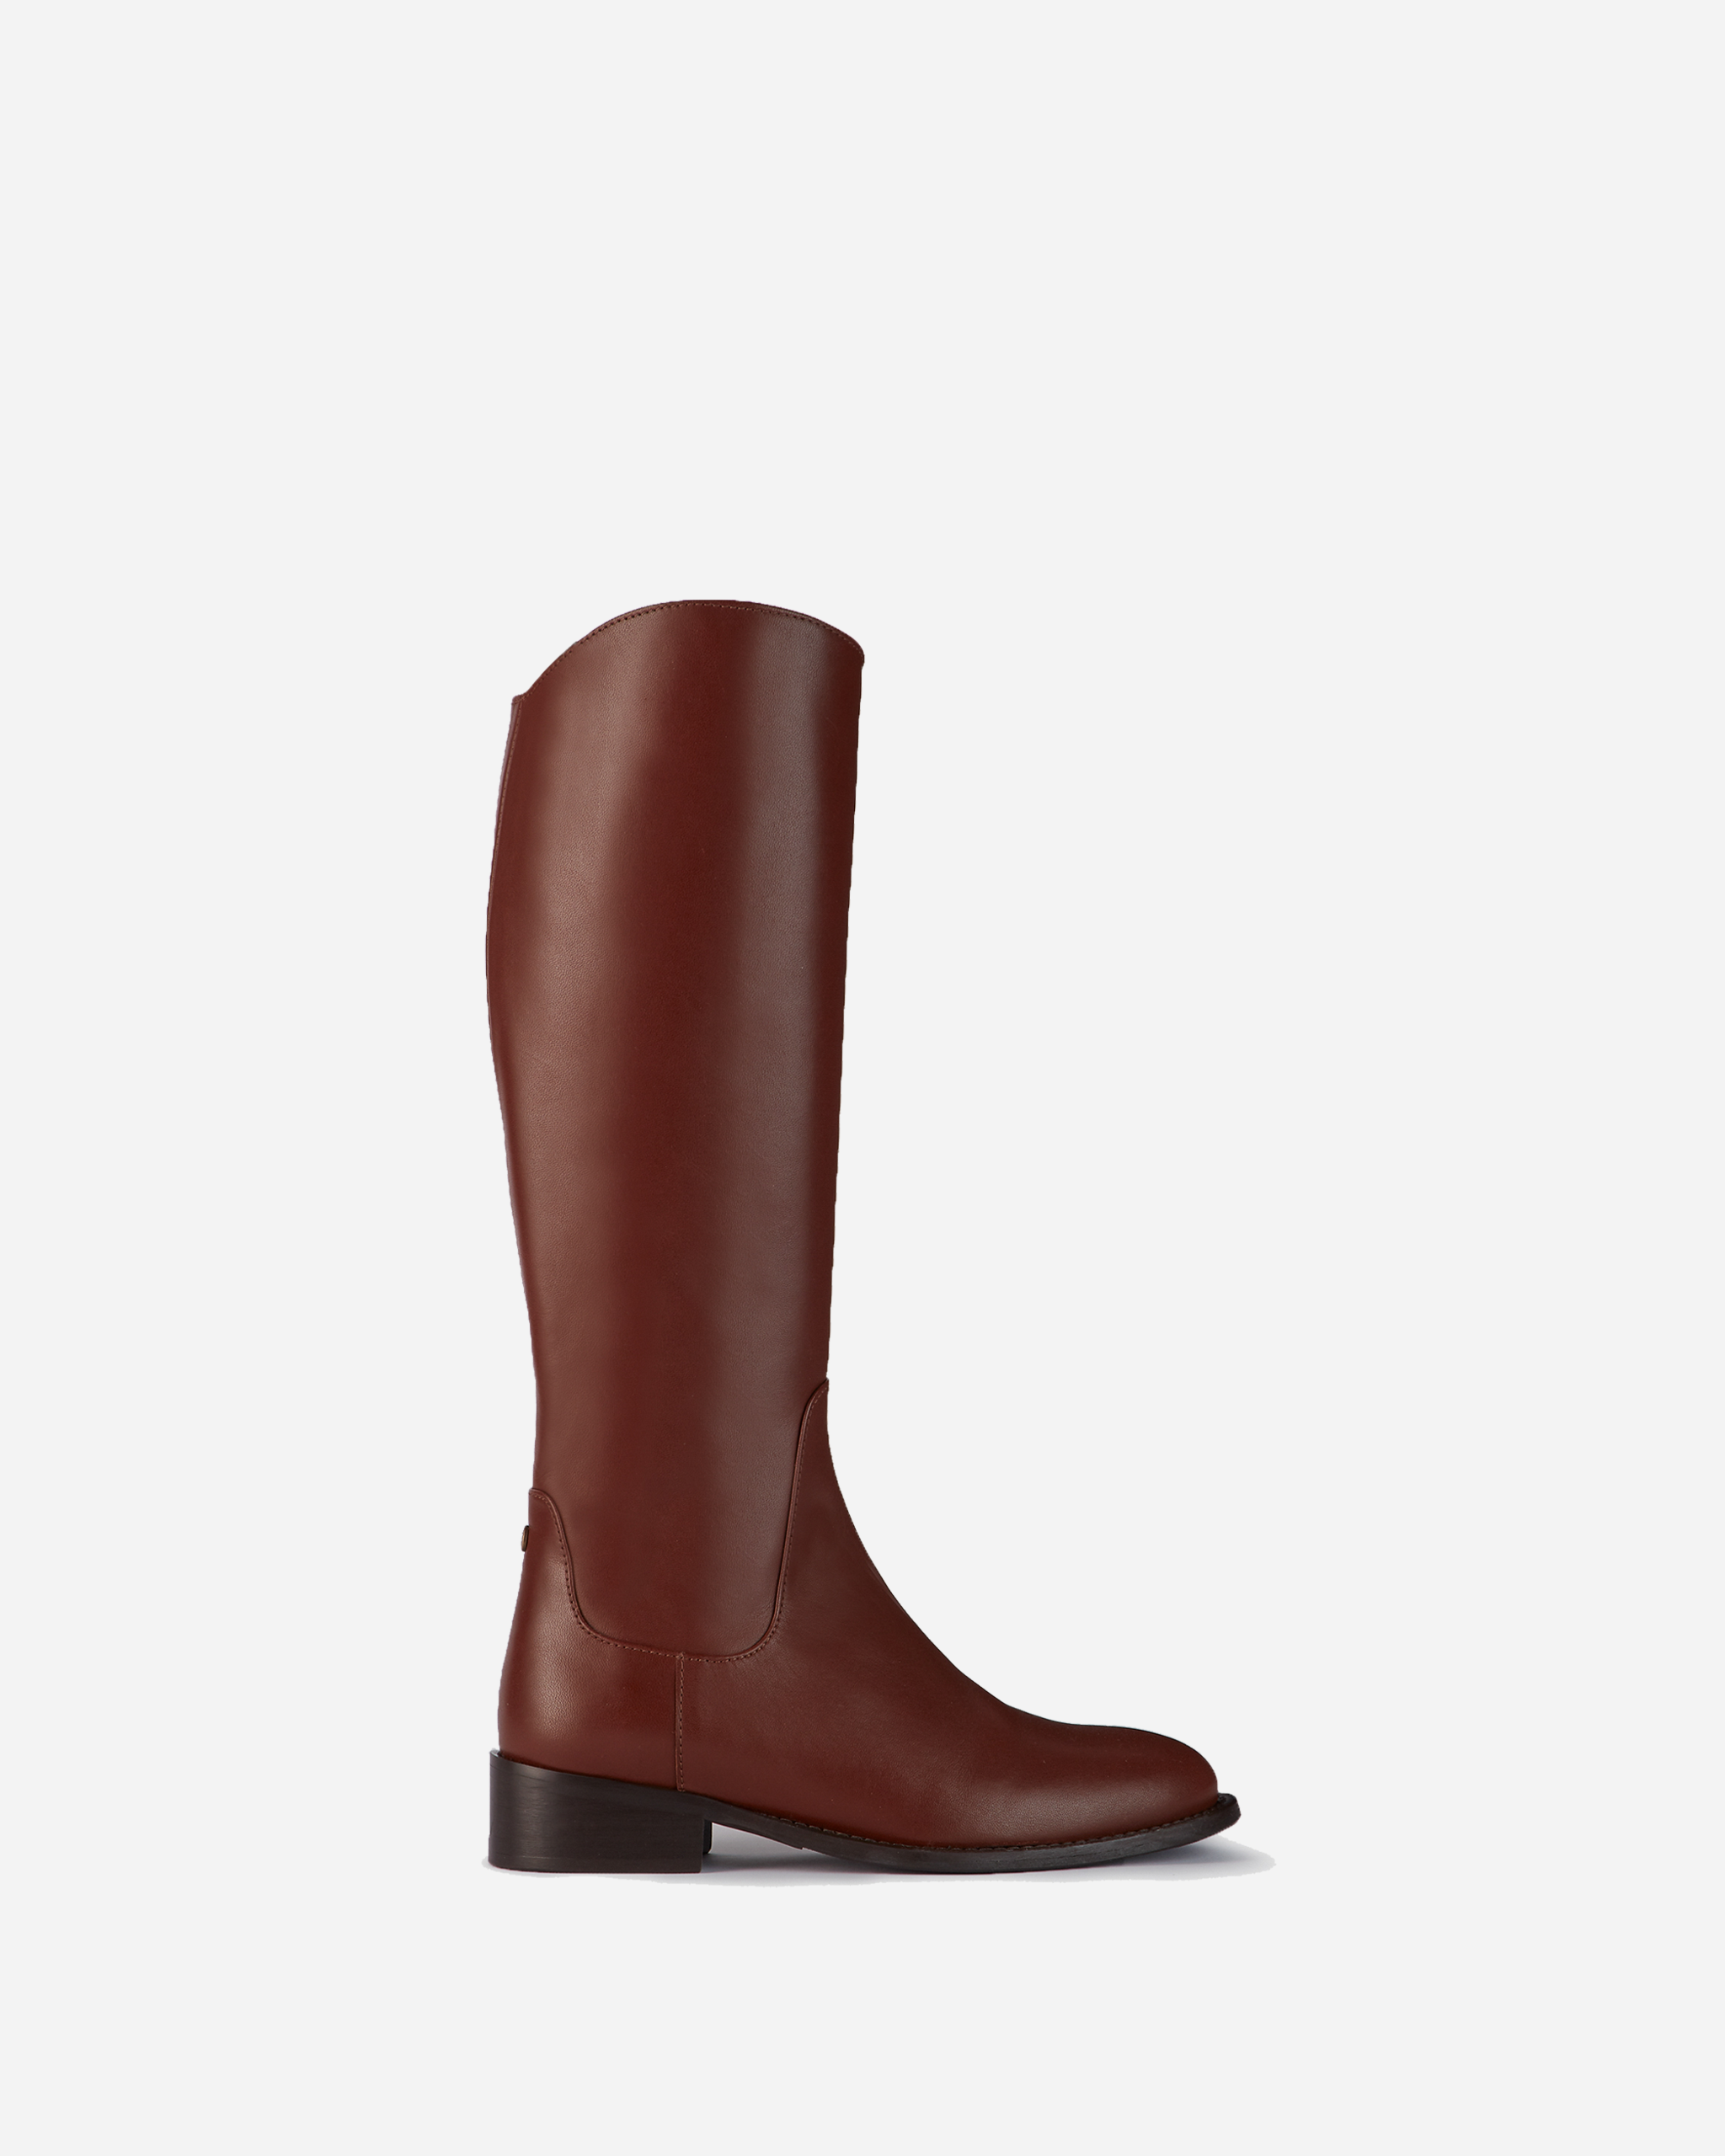 Burgundy knee high tan leather boots